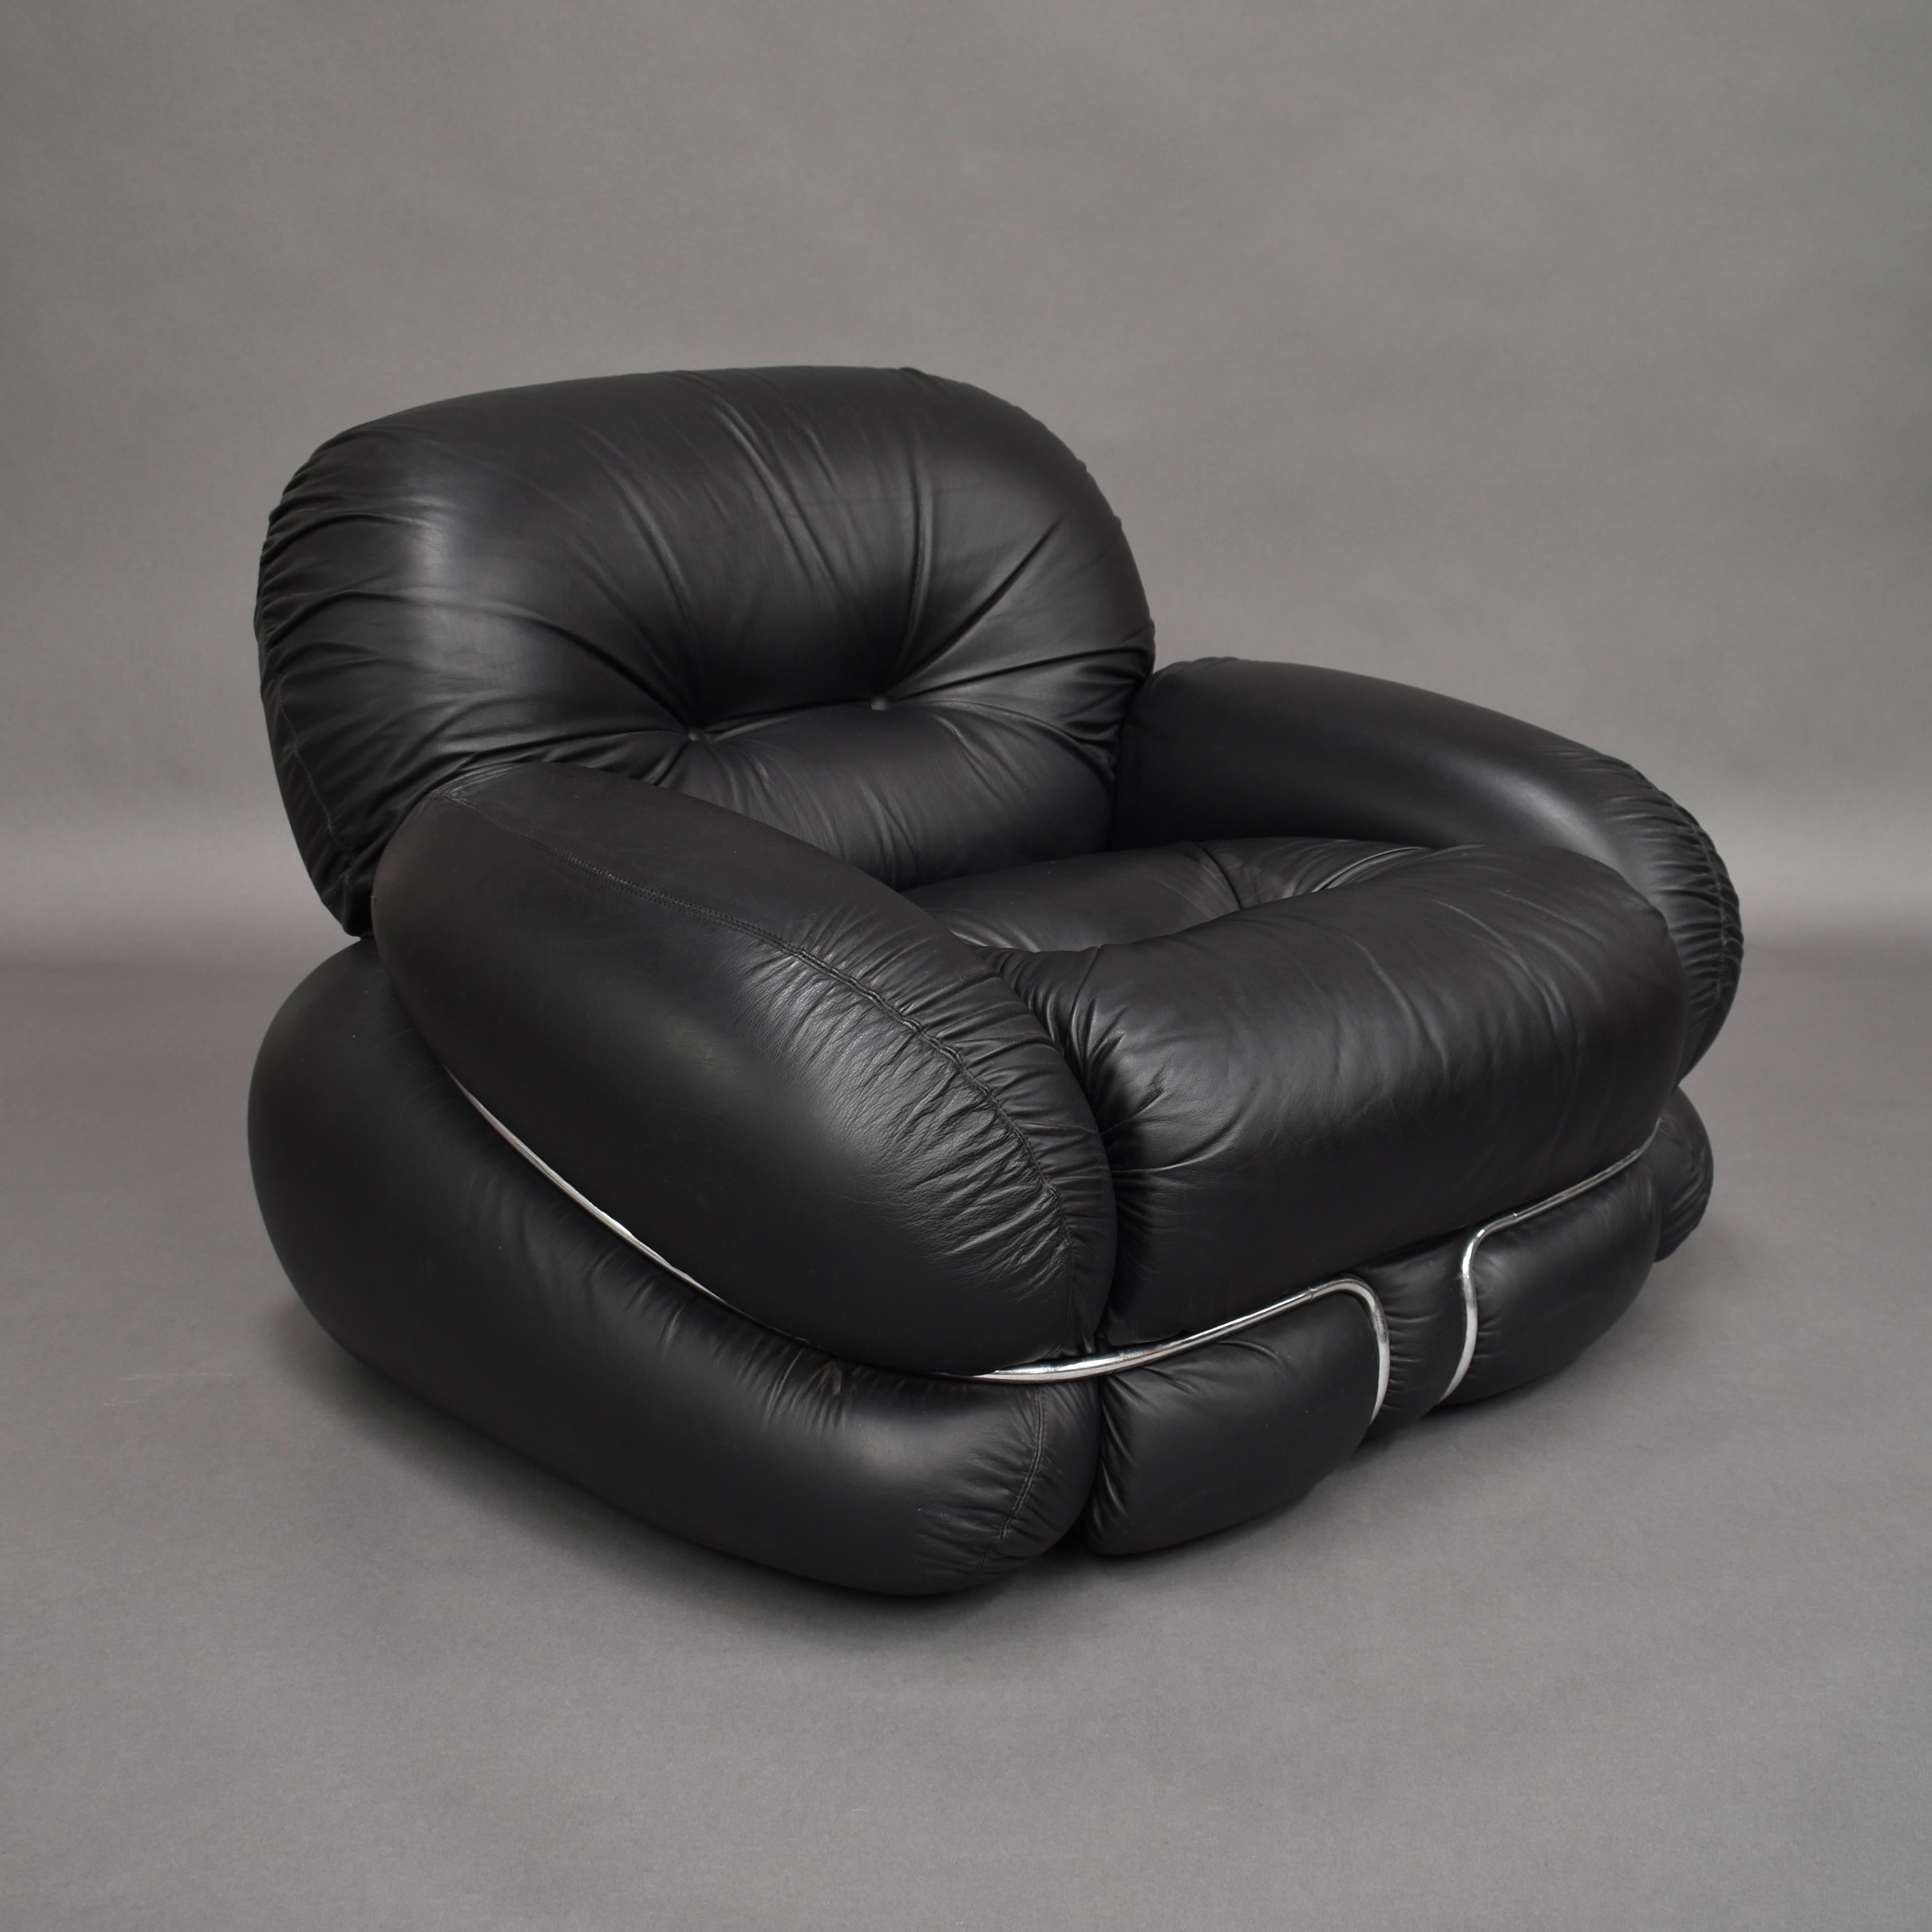 Late 20th Century Adriano Piazzesi Black Leather Lounge Chair, Italy, circa 1970